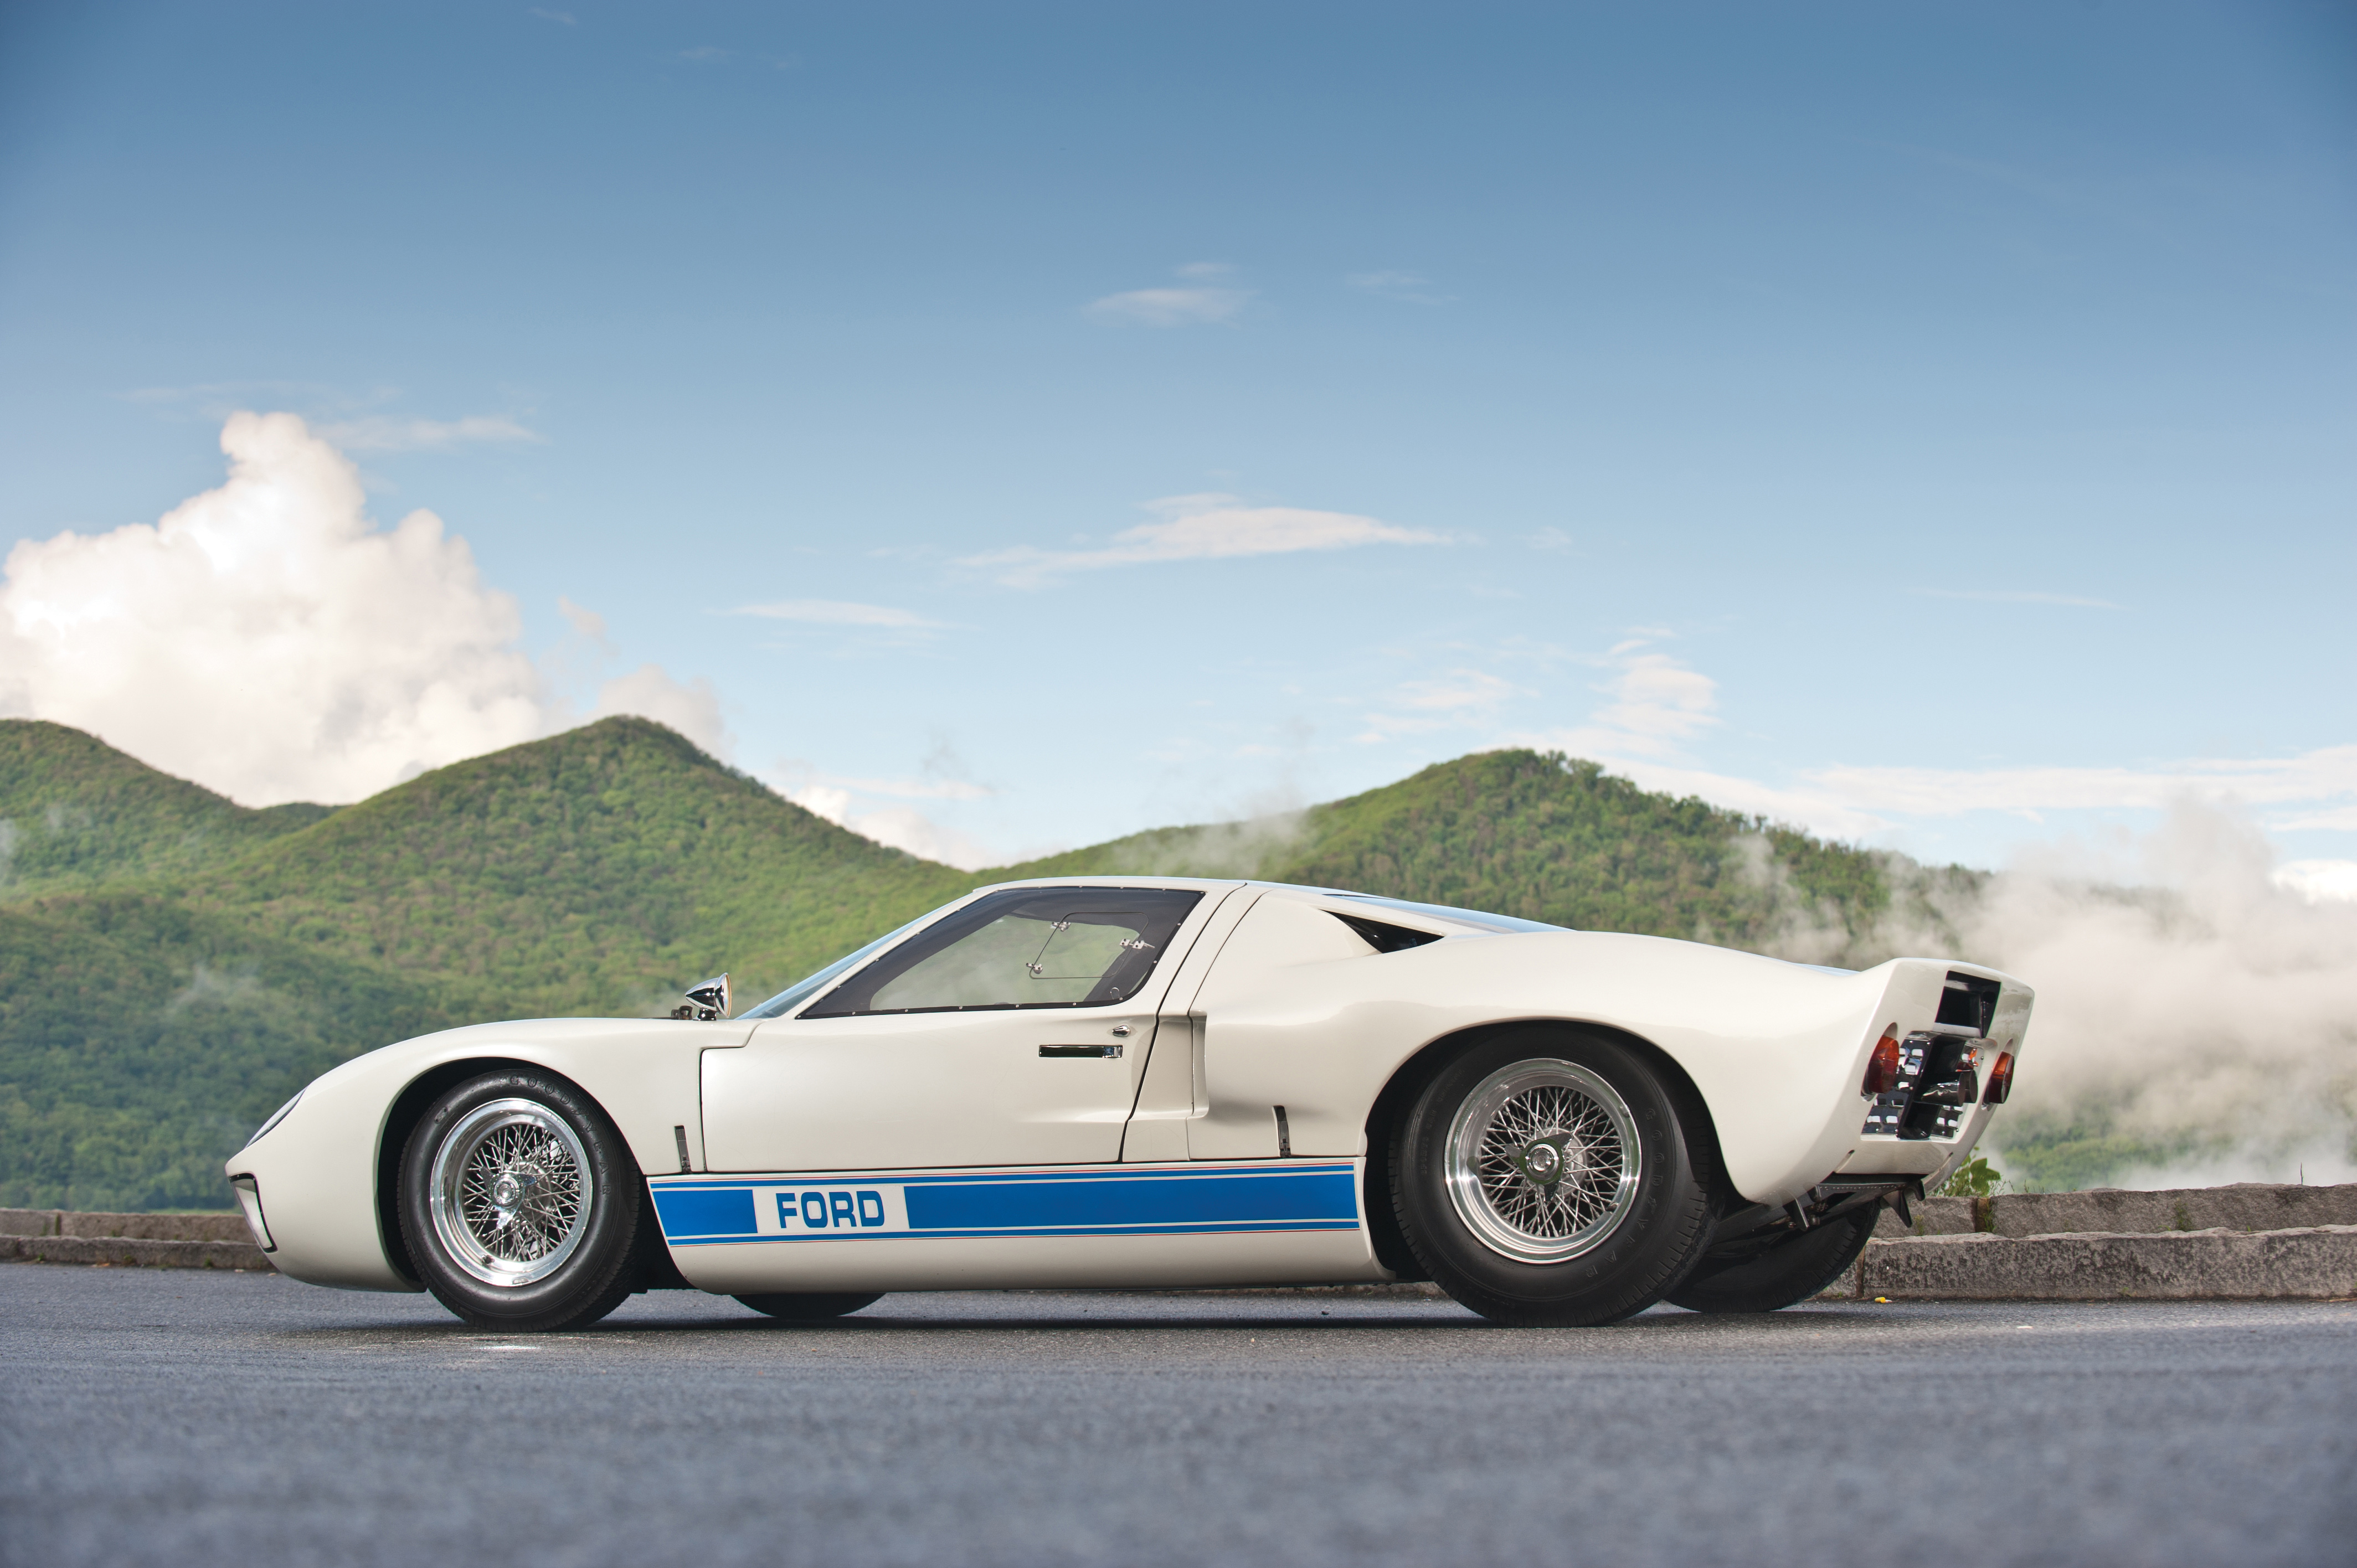 A white Ford Gt40